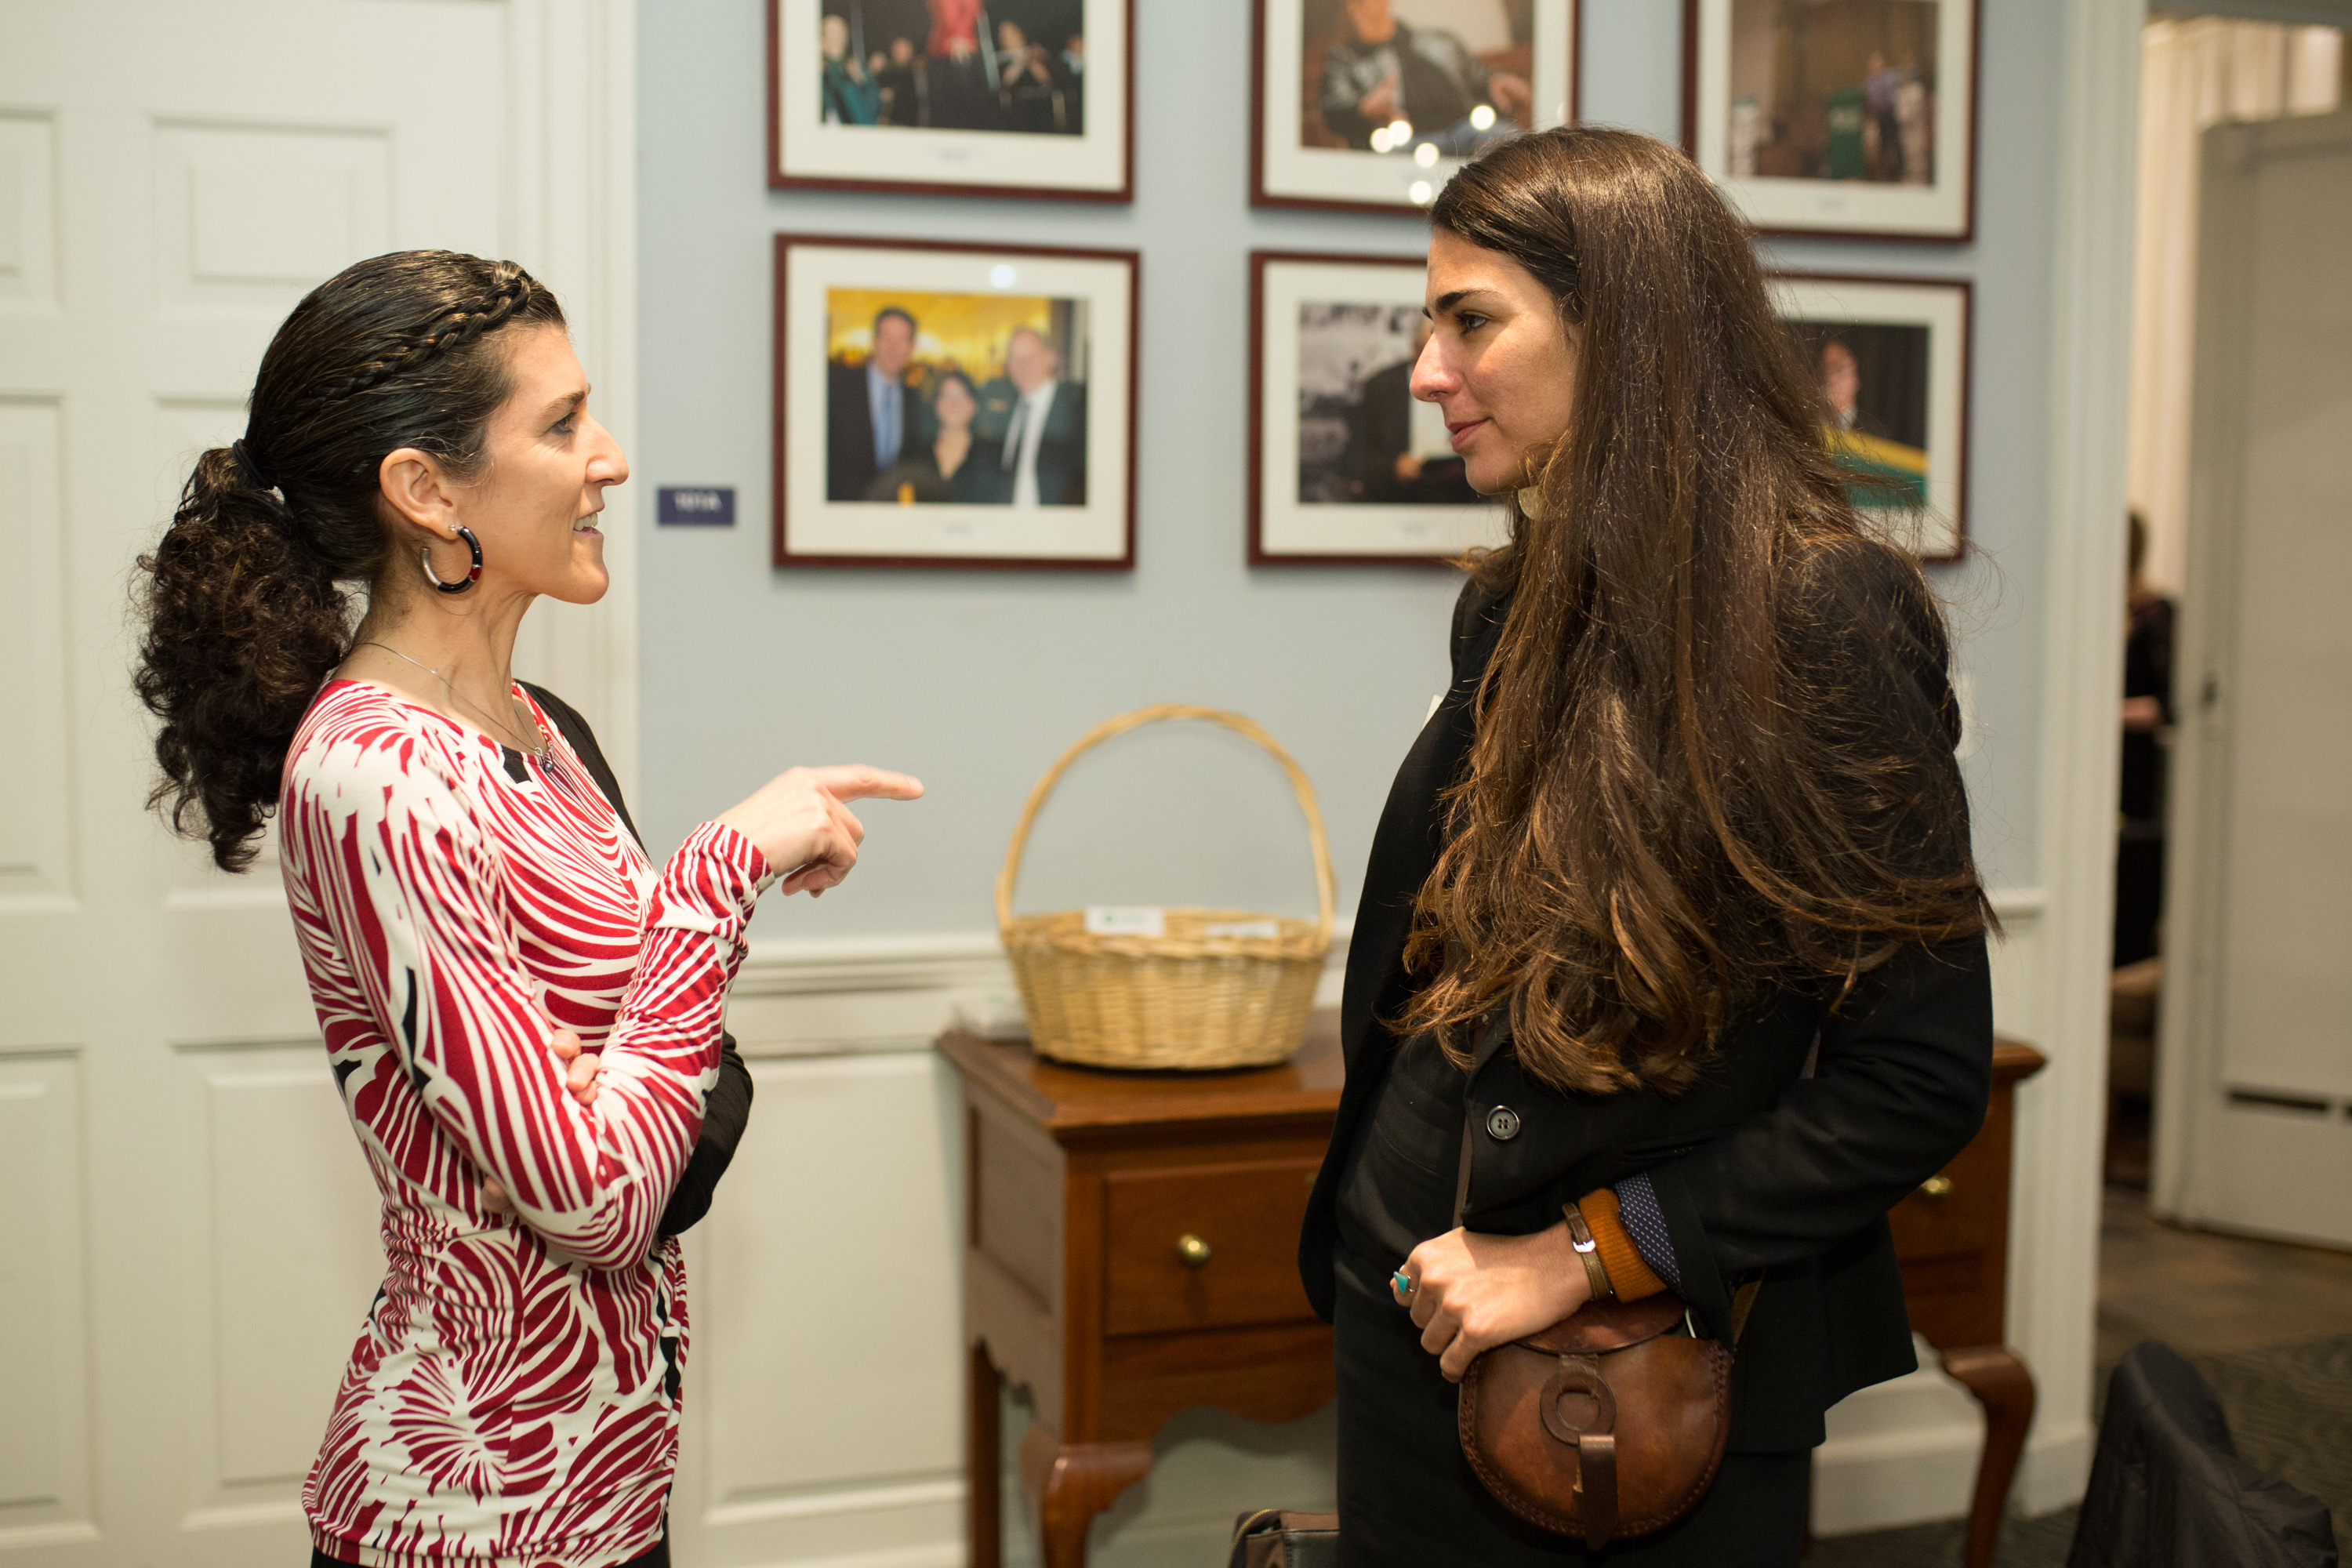 Lisa Fiore in a red and white dress stands and talks face-to-face with Saameh Solaimanim, who is dressed in black